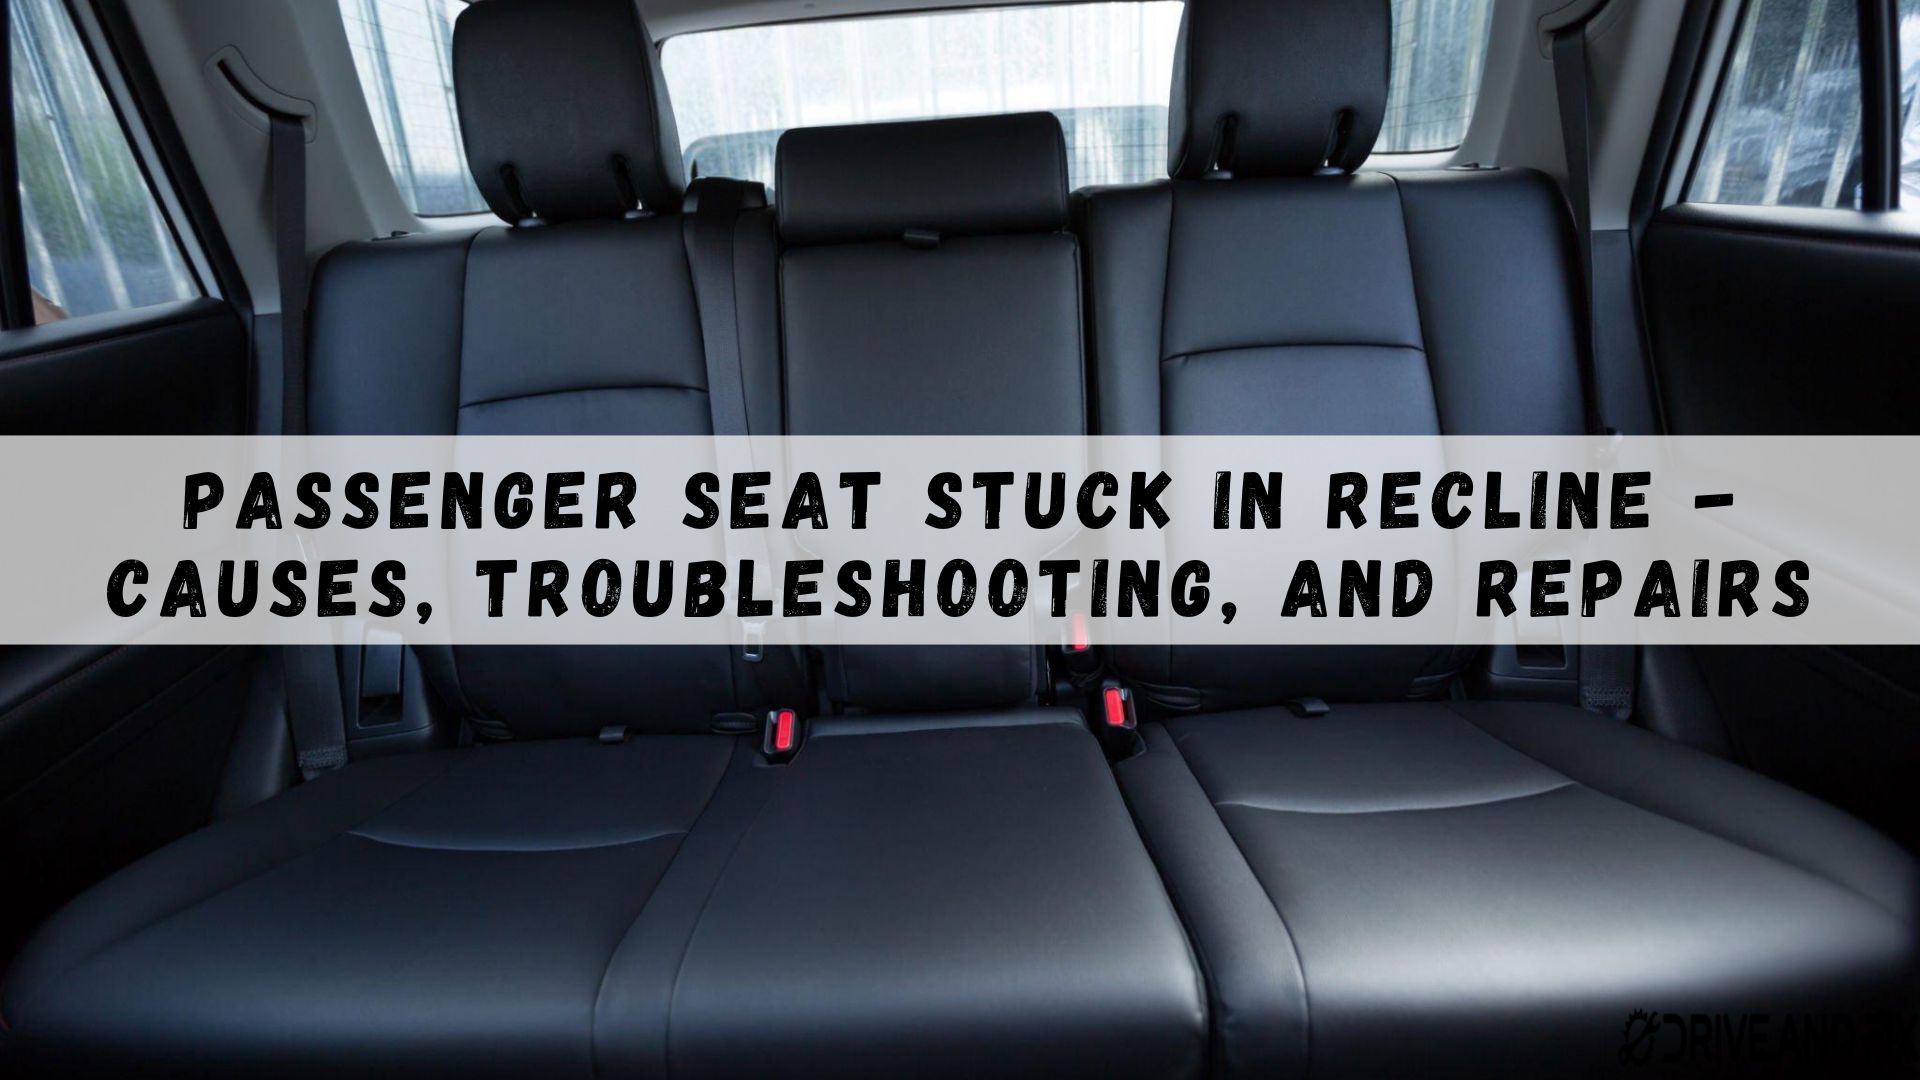 Passenger Seat Stuck In Recline - Causes, Troubleshooting, And Repairs